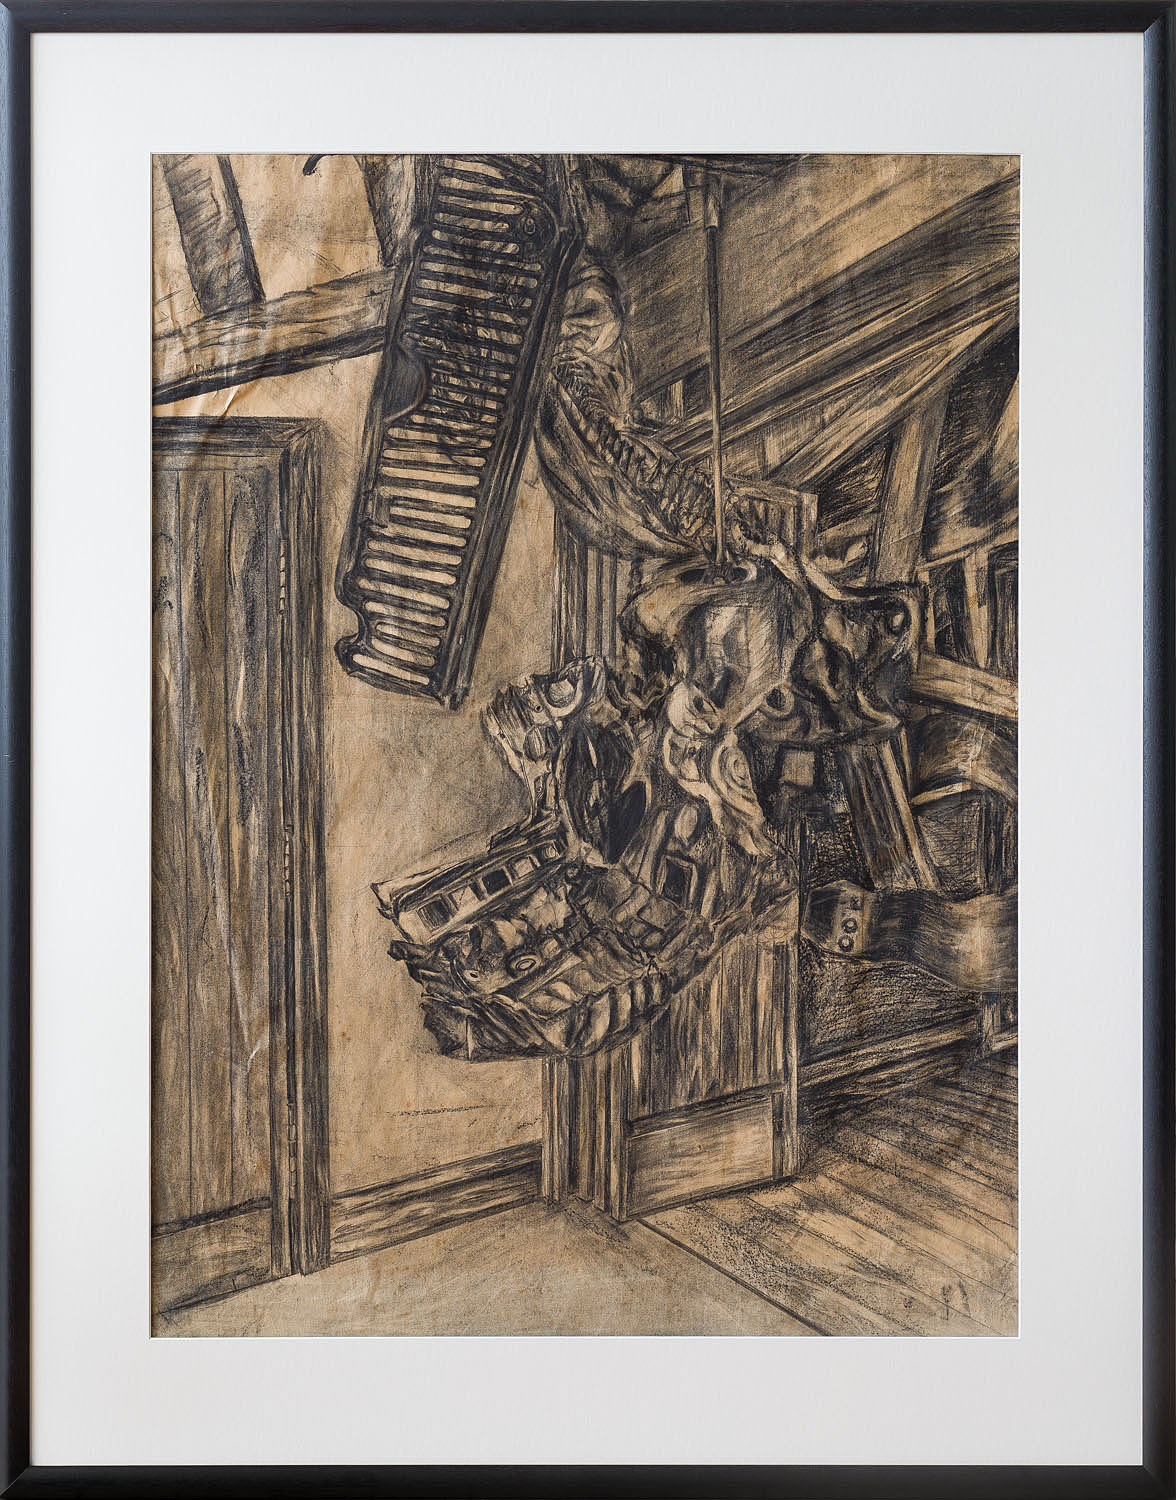 Untitled, (Car Part, Composition II), Still life comprised of old car parts, framed. Conte on paper, 1991, 10166 mm x 1270 mm x 50 mm